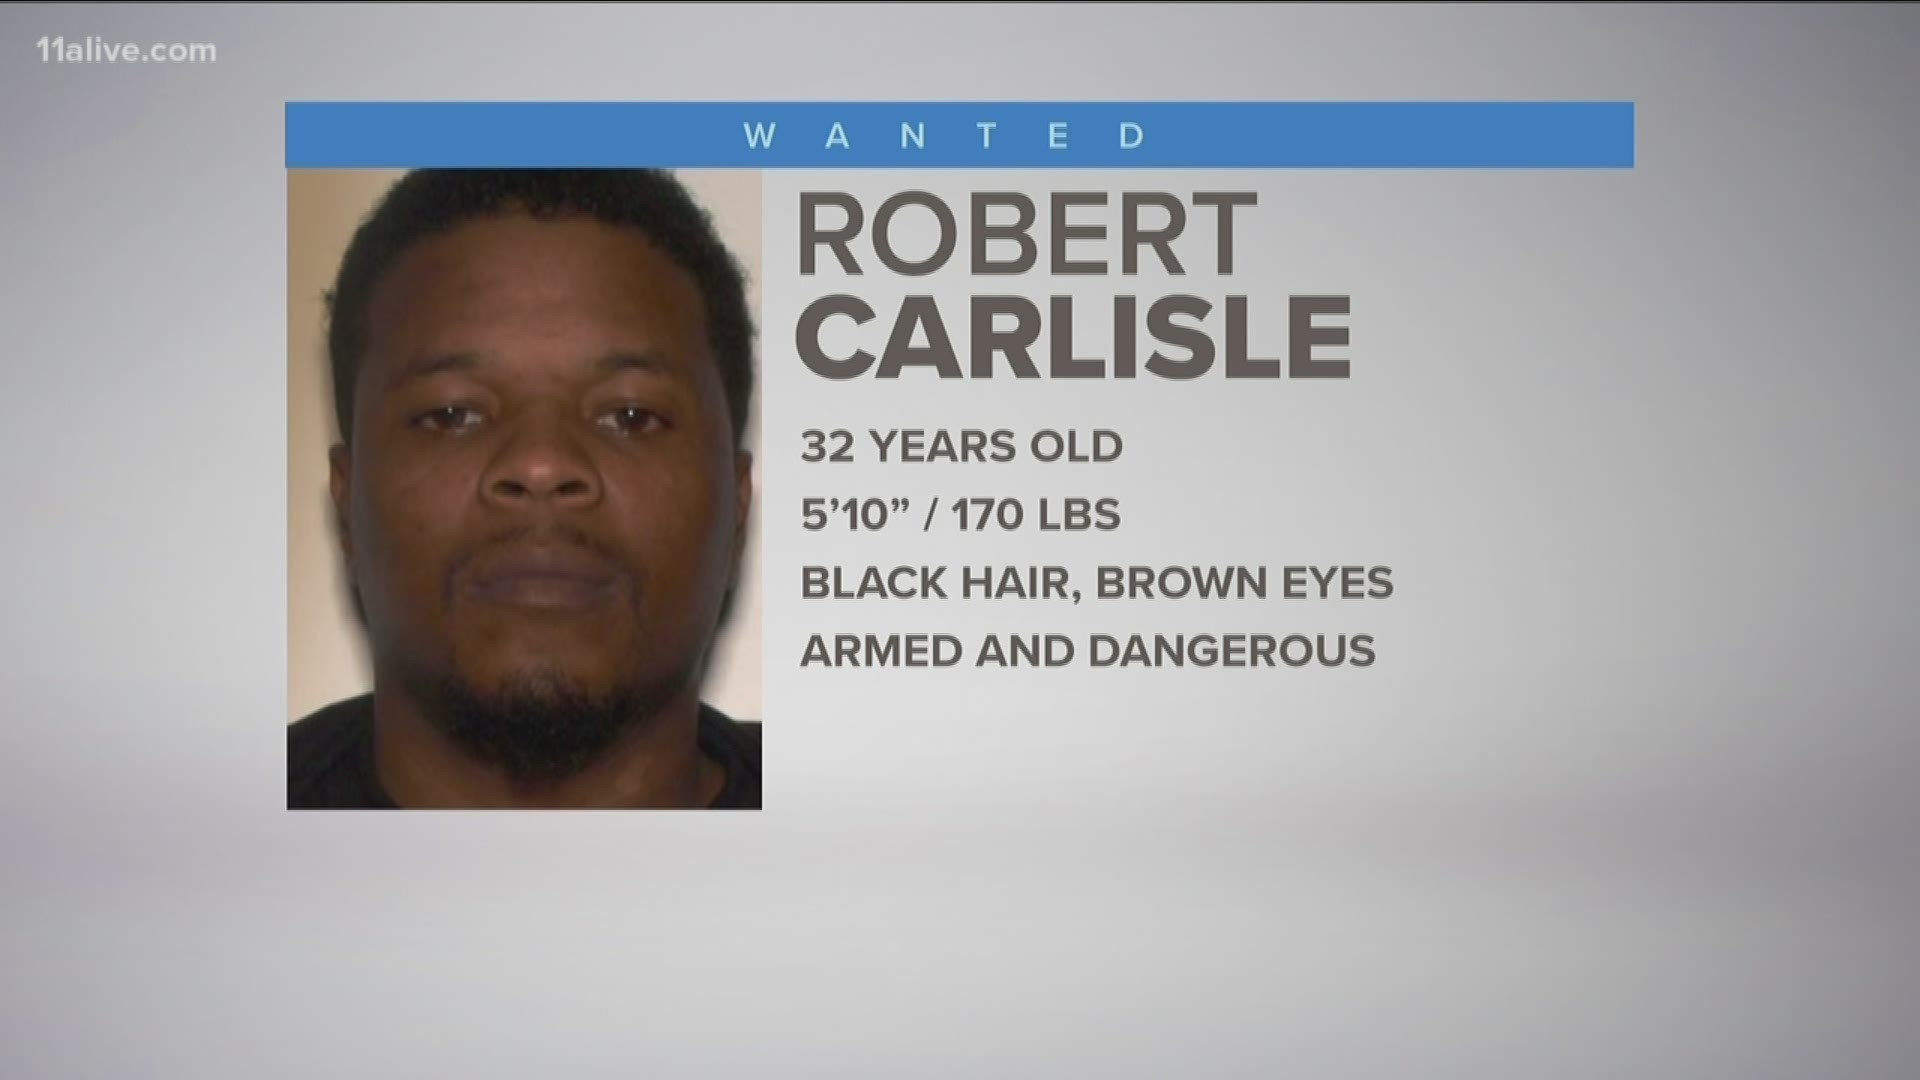 Federal authorities are offering a $2,500 reward for information leading to the capture of Robert Carlisle, suspected in the deaths of Derrick Ruff and Joshua Jackson.